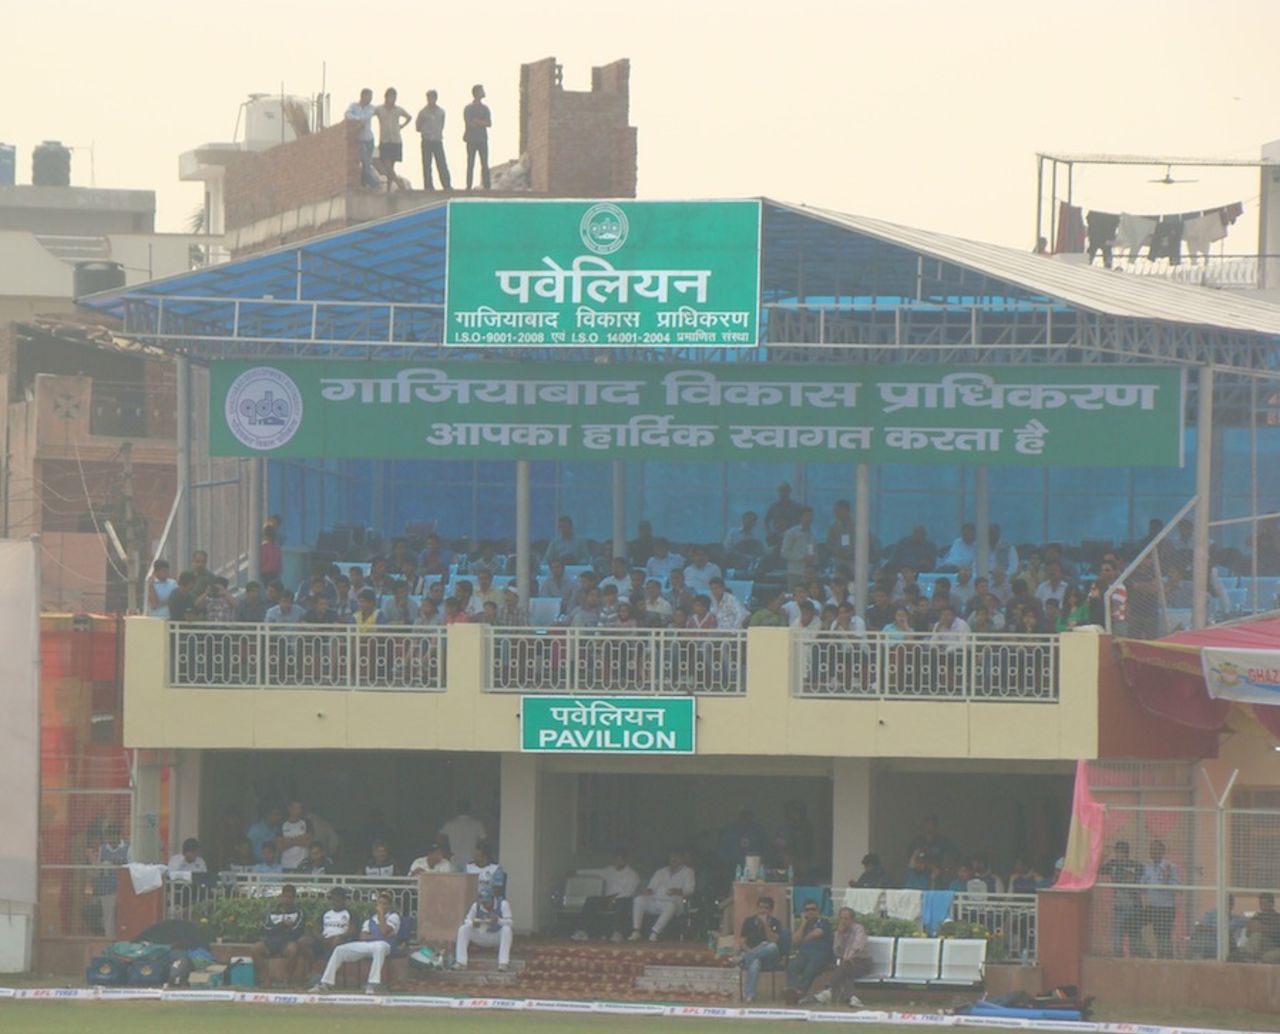 A view of the pavilion in Ghaziabad, UP v Delhi, Group B, Ranji Trophy 2012-13, Ghaziabad, 2nd day, November 3, 2012